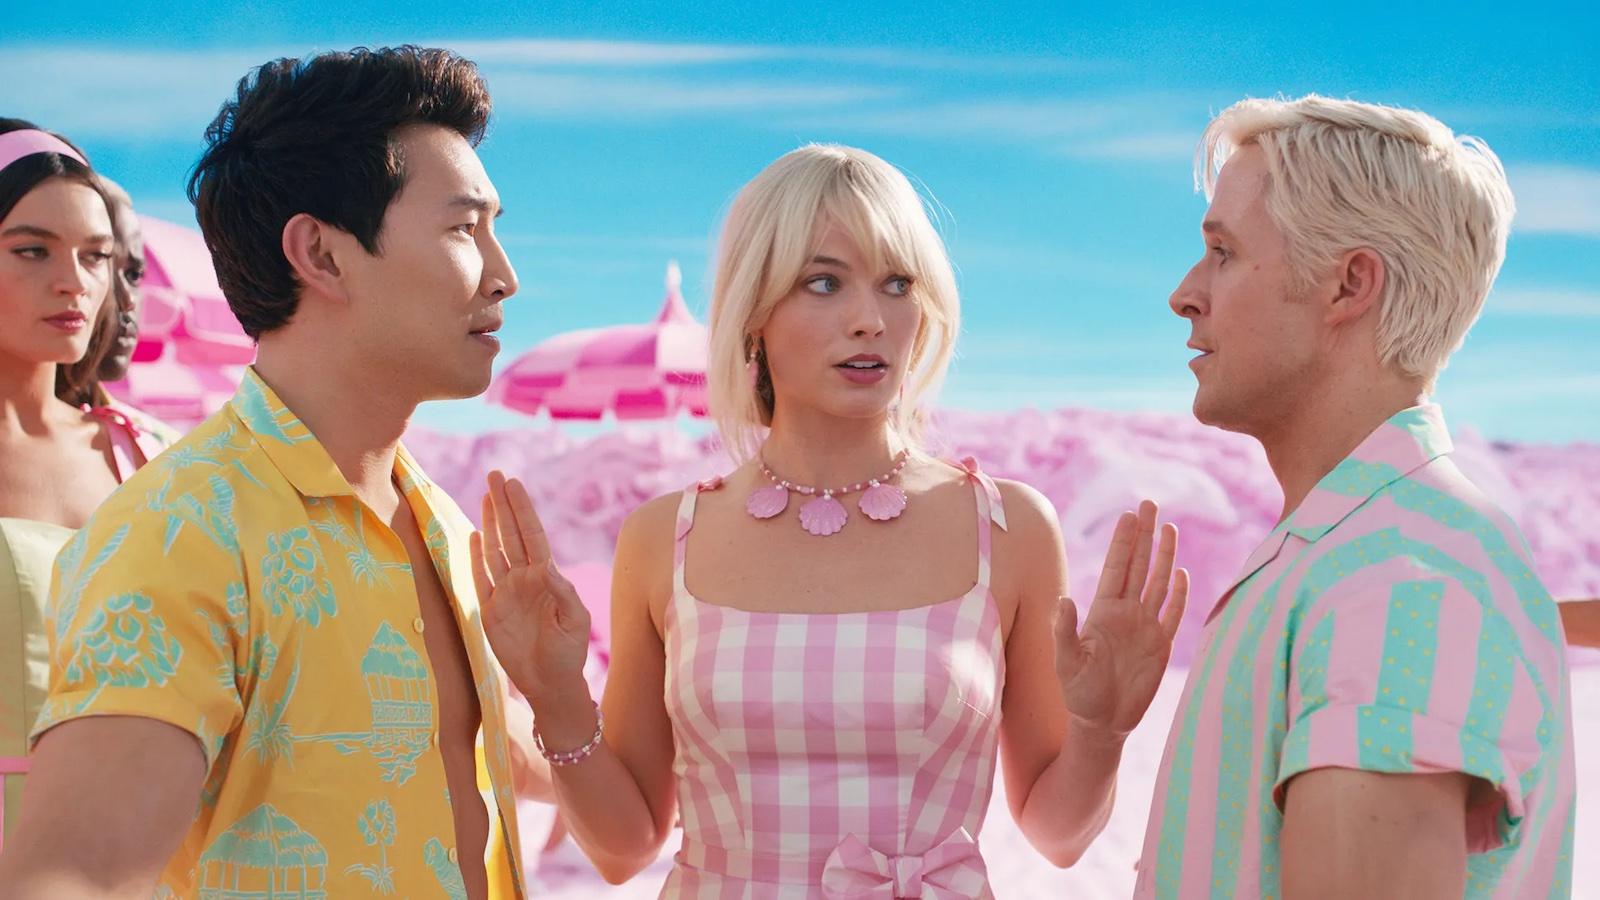 Is the 'Barbie' movie age appropriate? What parents should know